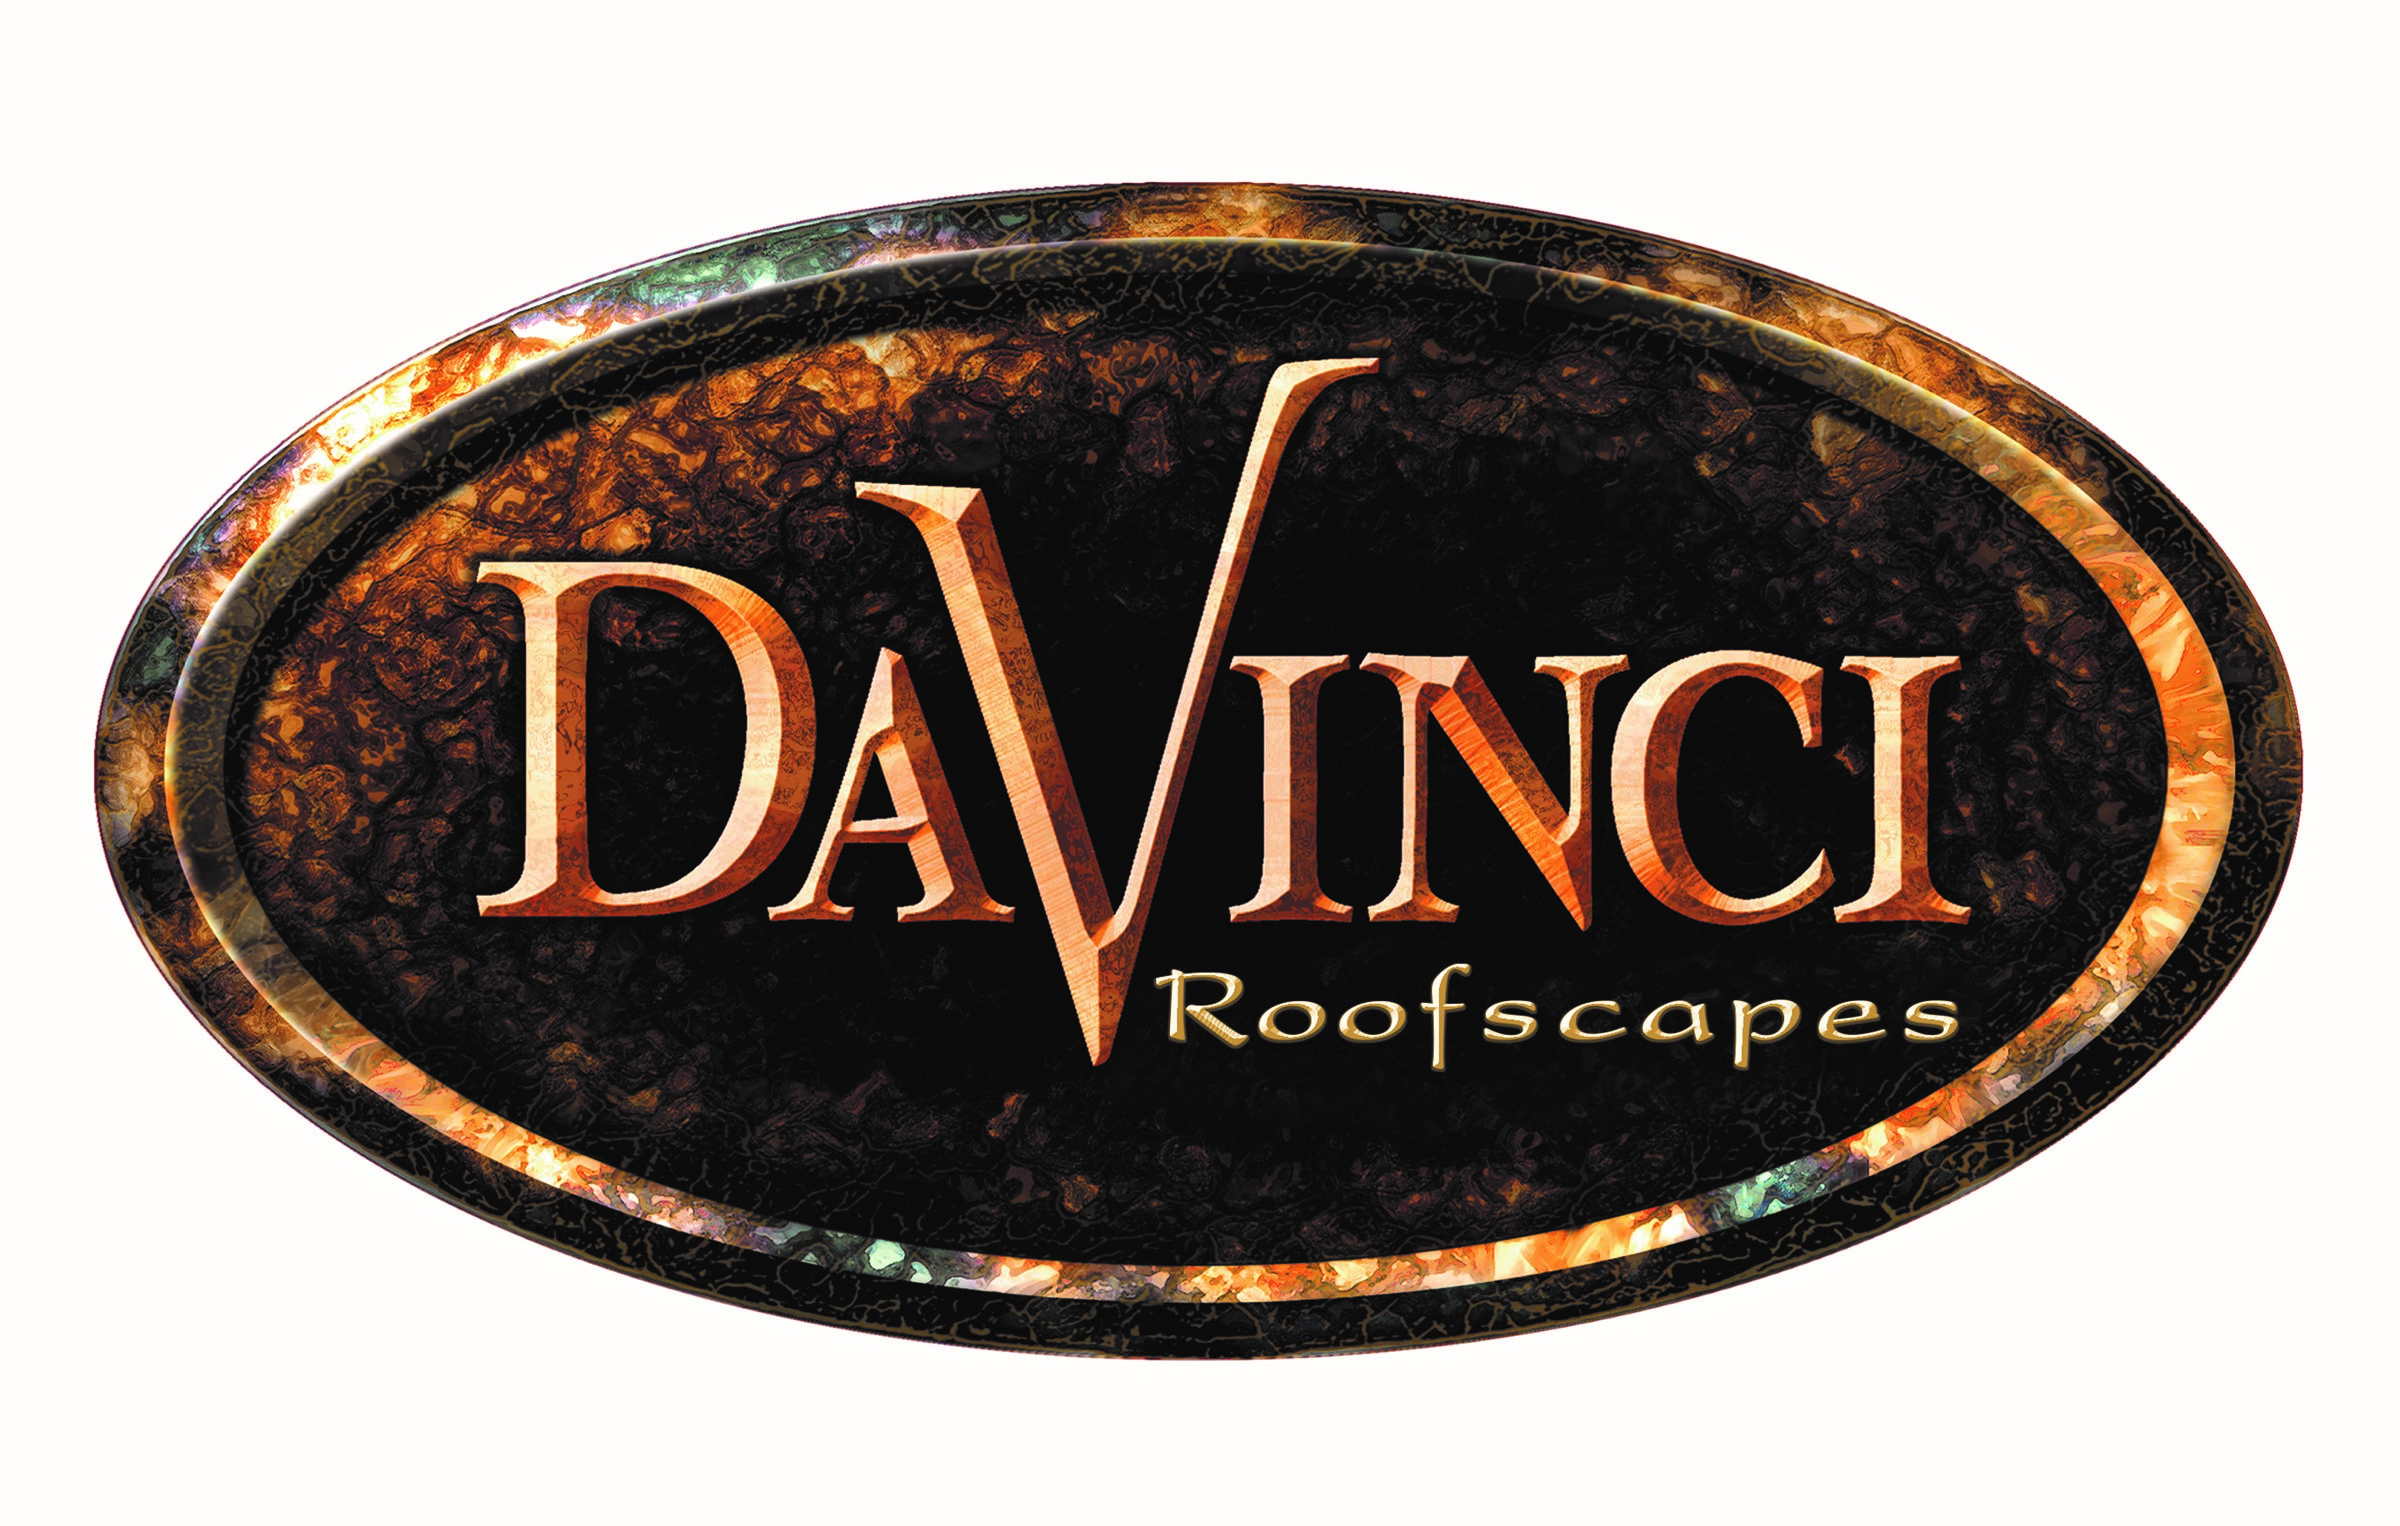 DaVinci Logo - DaVinci Roofscapes Acquired by Royal Building Products | 2019-06-10 ...